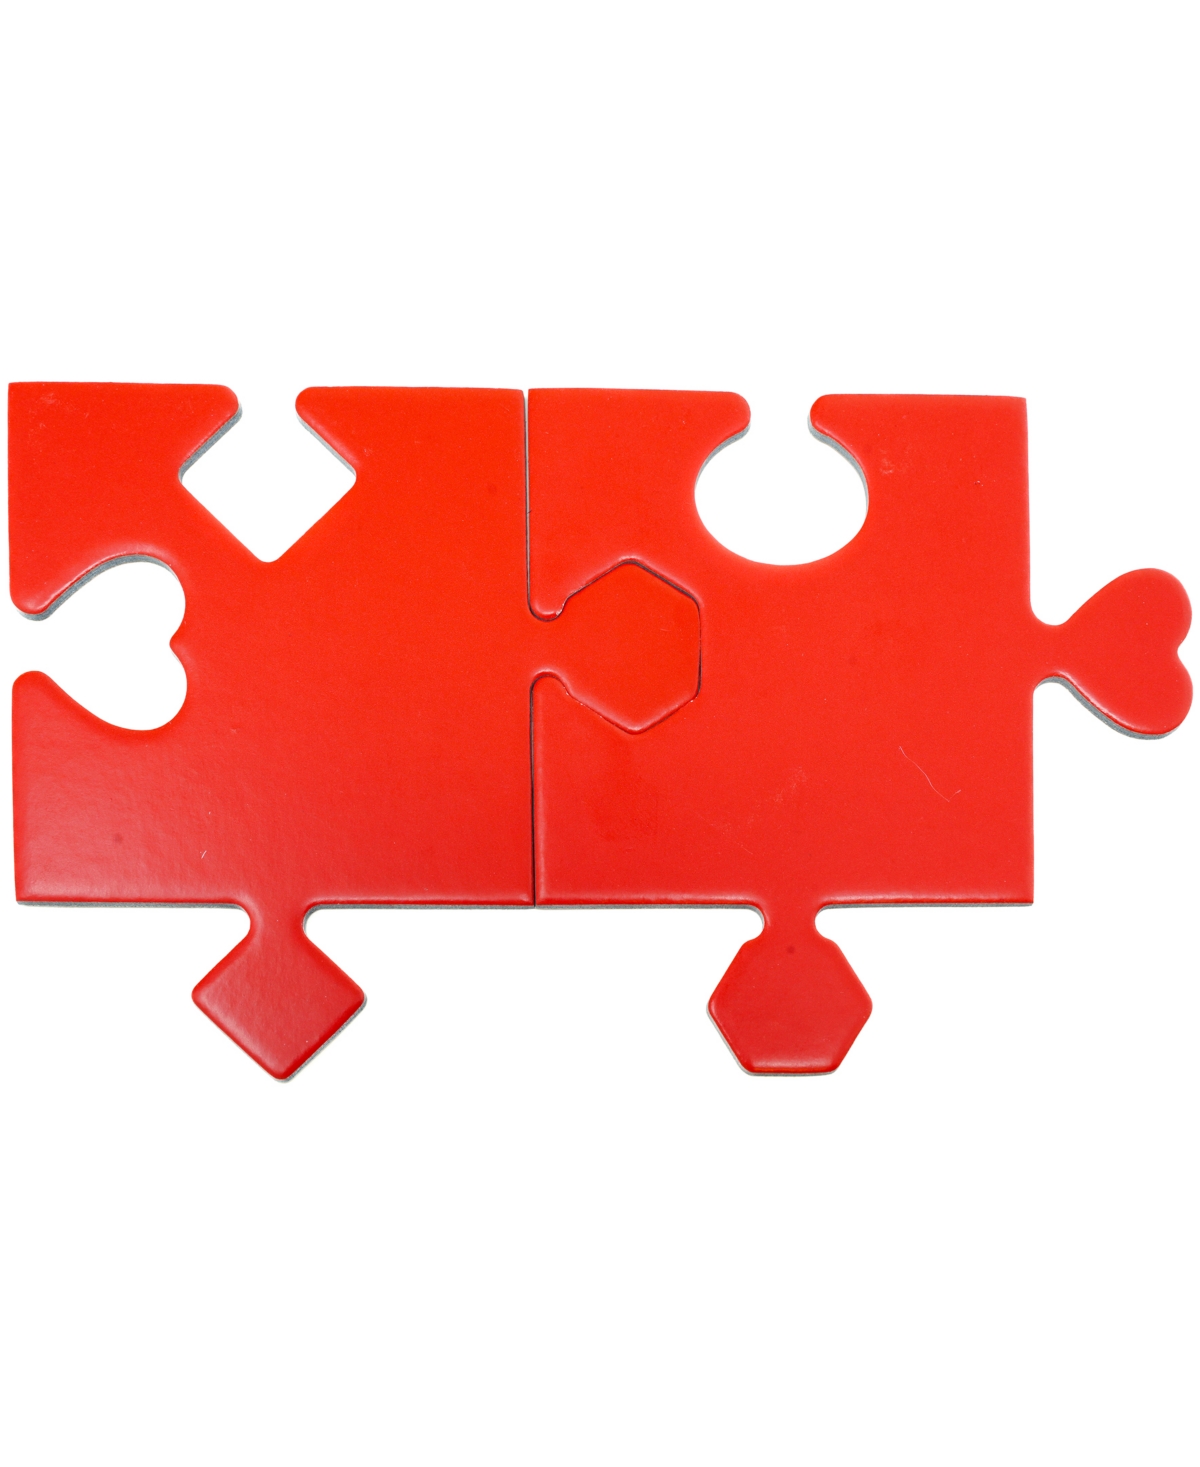 Shop University Games Areyougame.com A Very Puzzling Puzzle In No Color